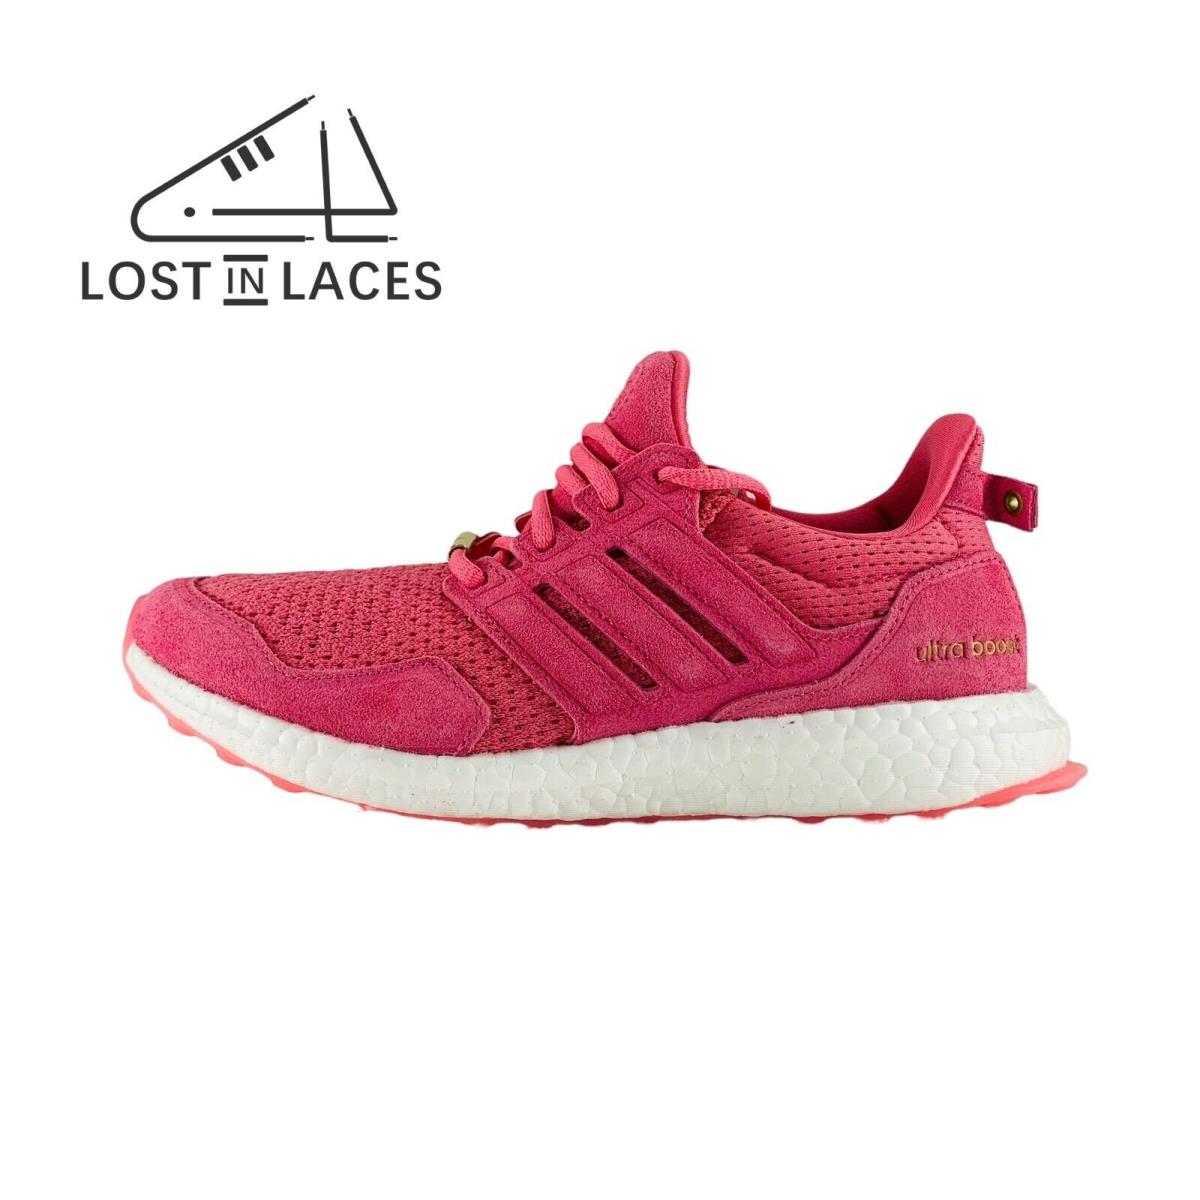 Adidas Ultraboost 1.0 Pink Fusion Gold Running Shoes ID9664 Women`s Sizes - Pink